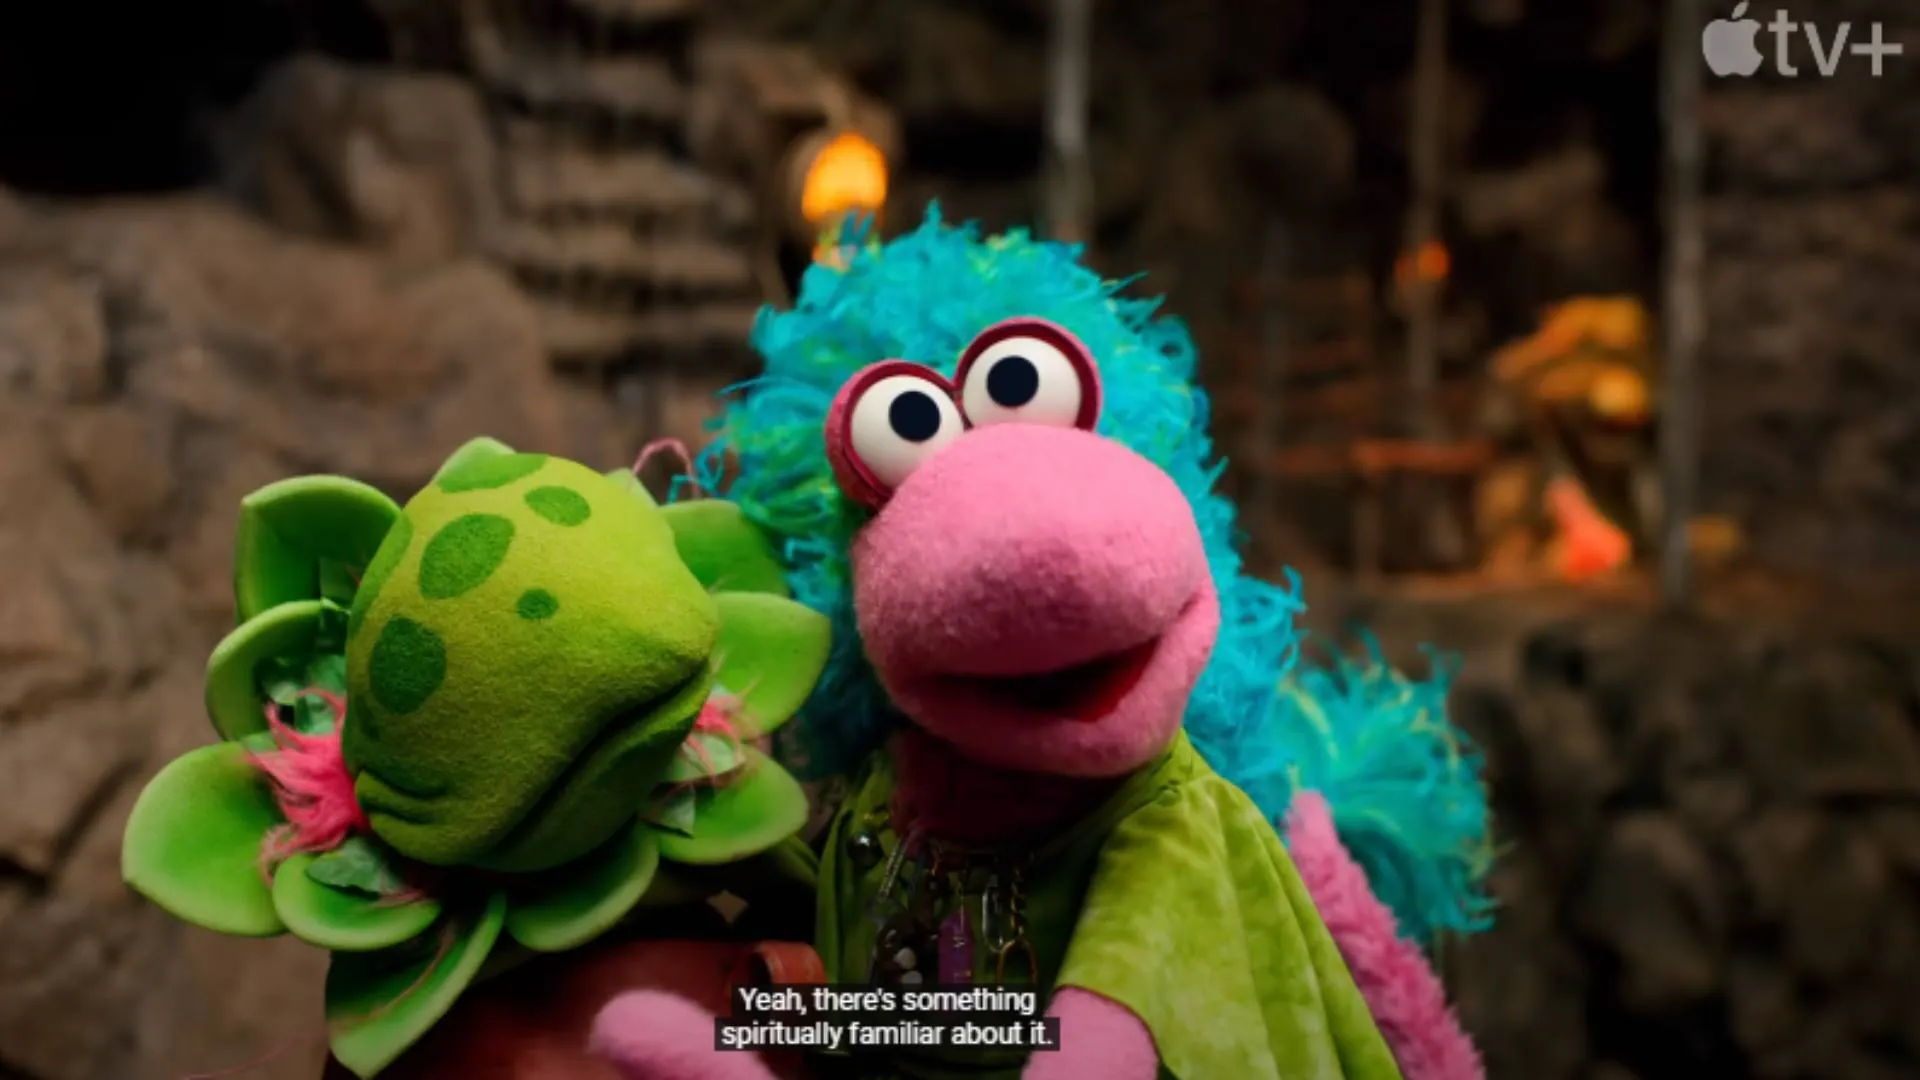 Fraggle Rock Returns! New Season Trailer Reveals Premiere Date and Guest Stars